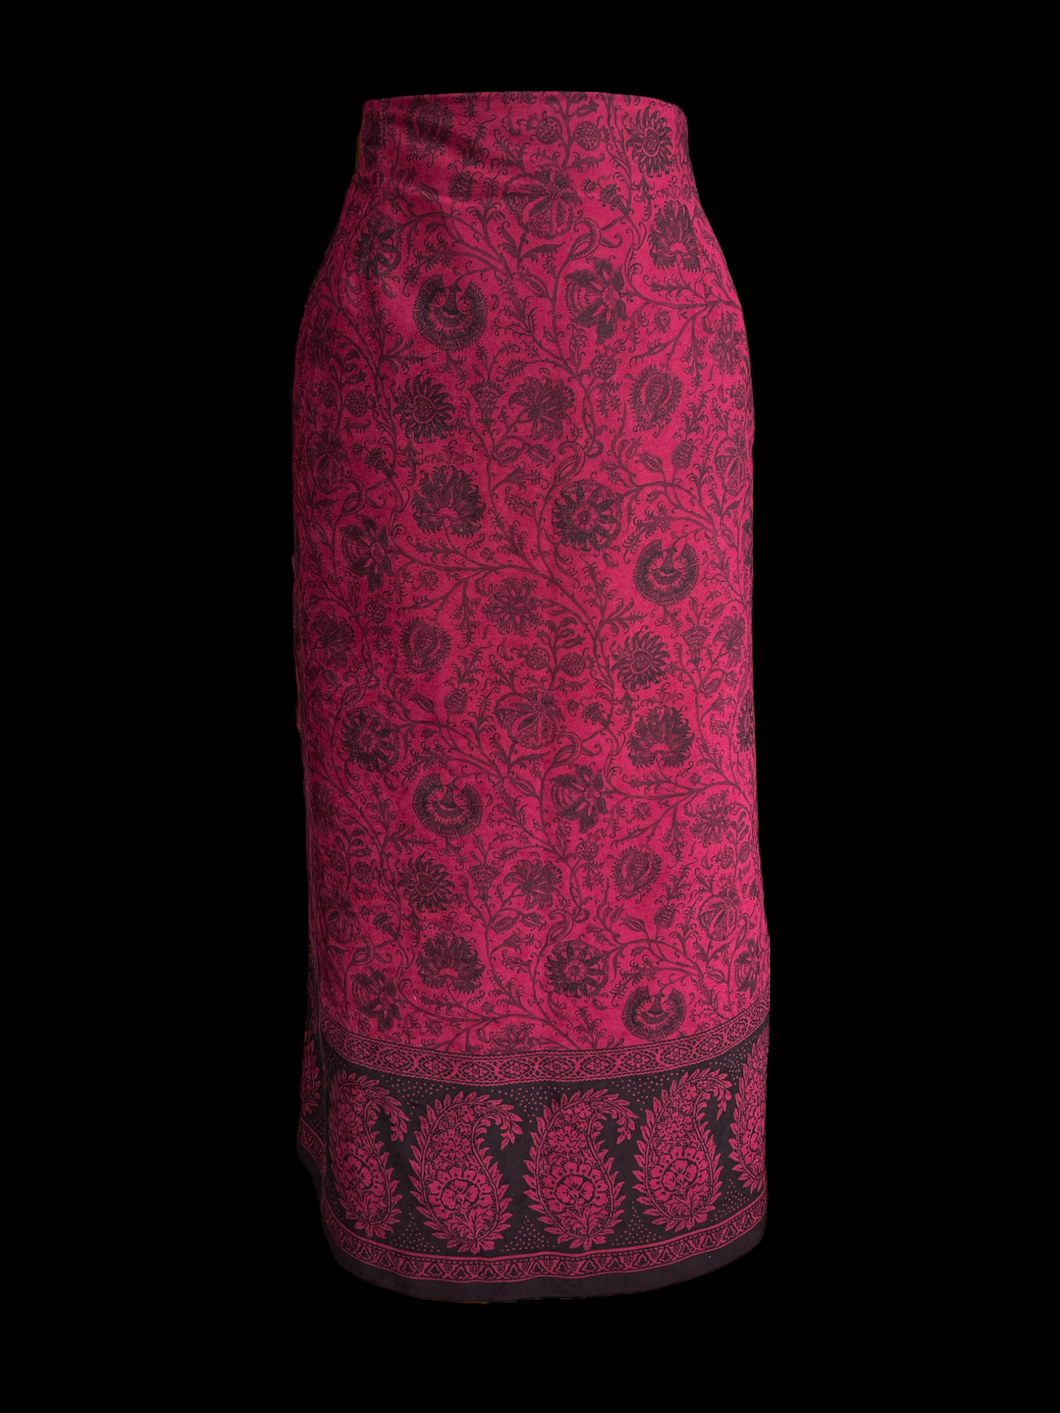 L/XL Vintahe maroon suede-like fabric maxi skirt w/ floral paisley design, & zipper on back